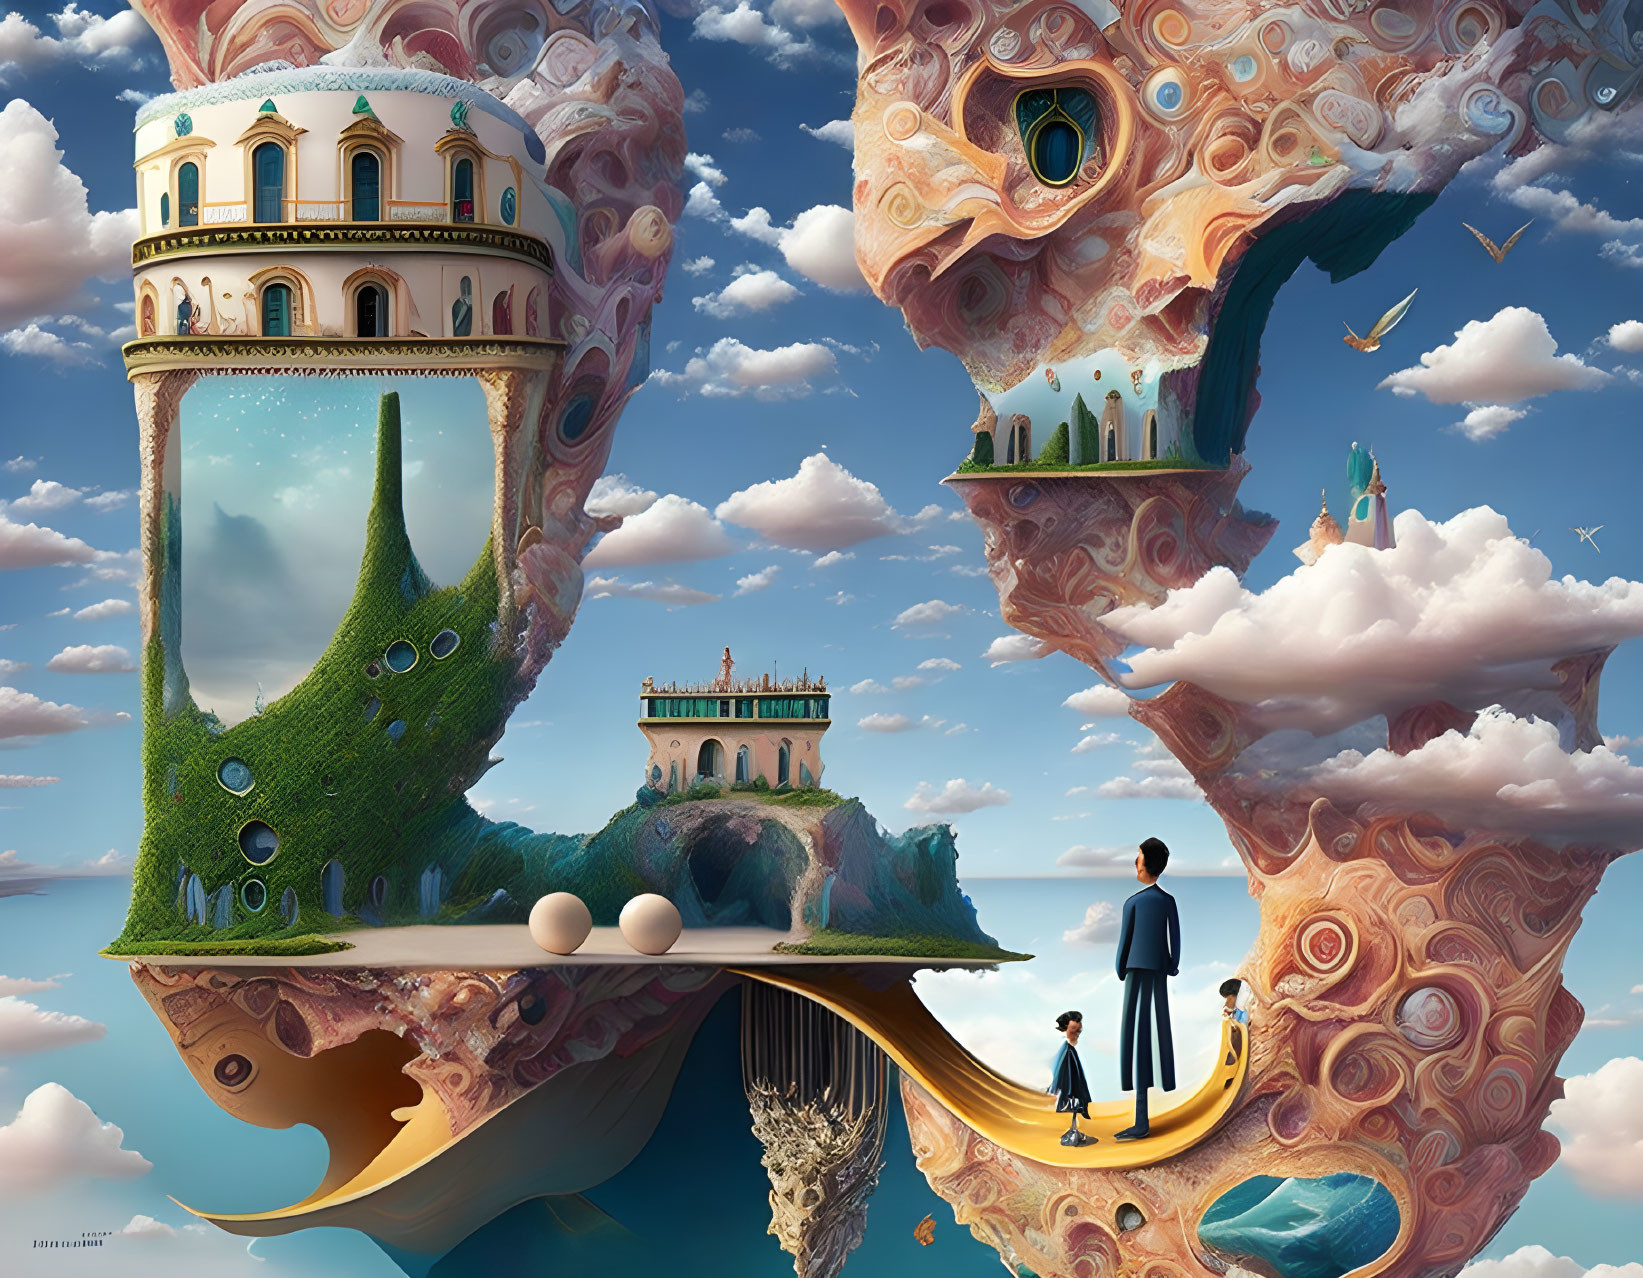 Surreal artwork: Floating island structures with classical buildings, trees, man and child in cloud-filled